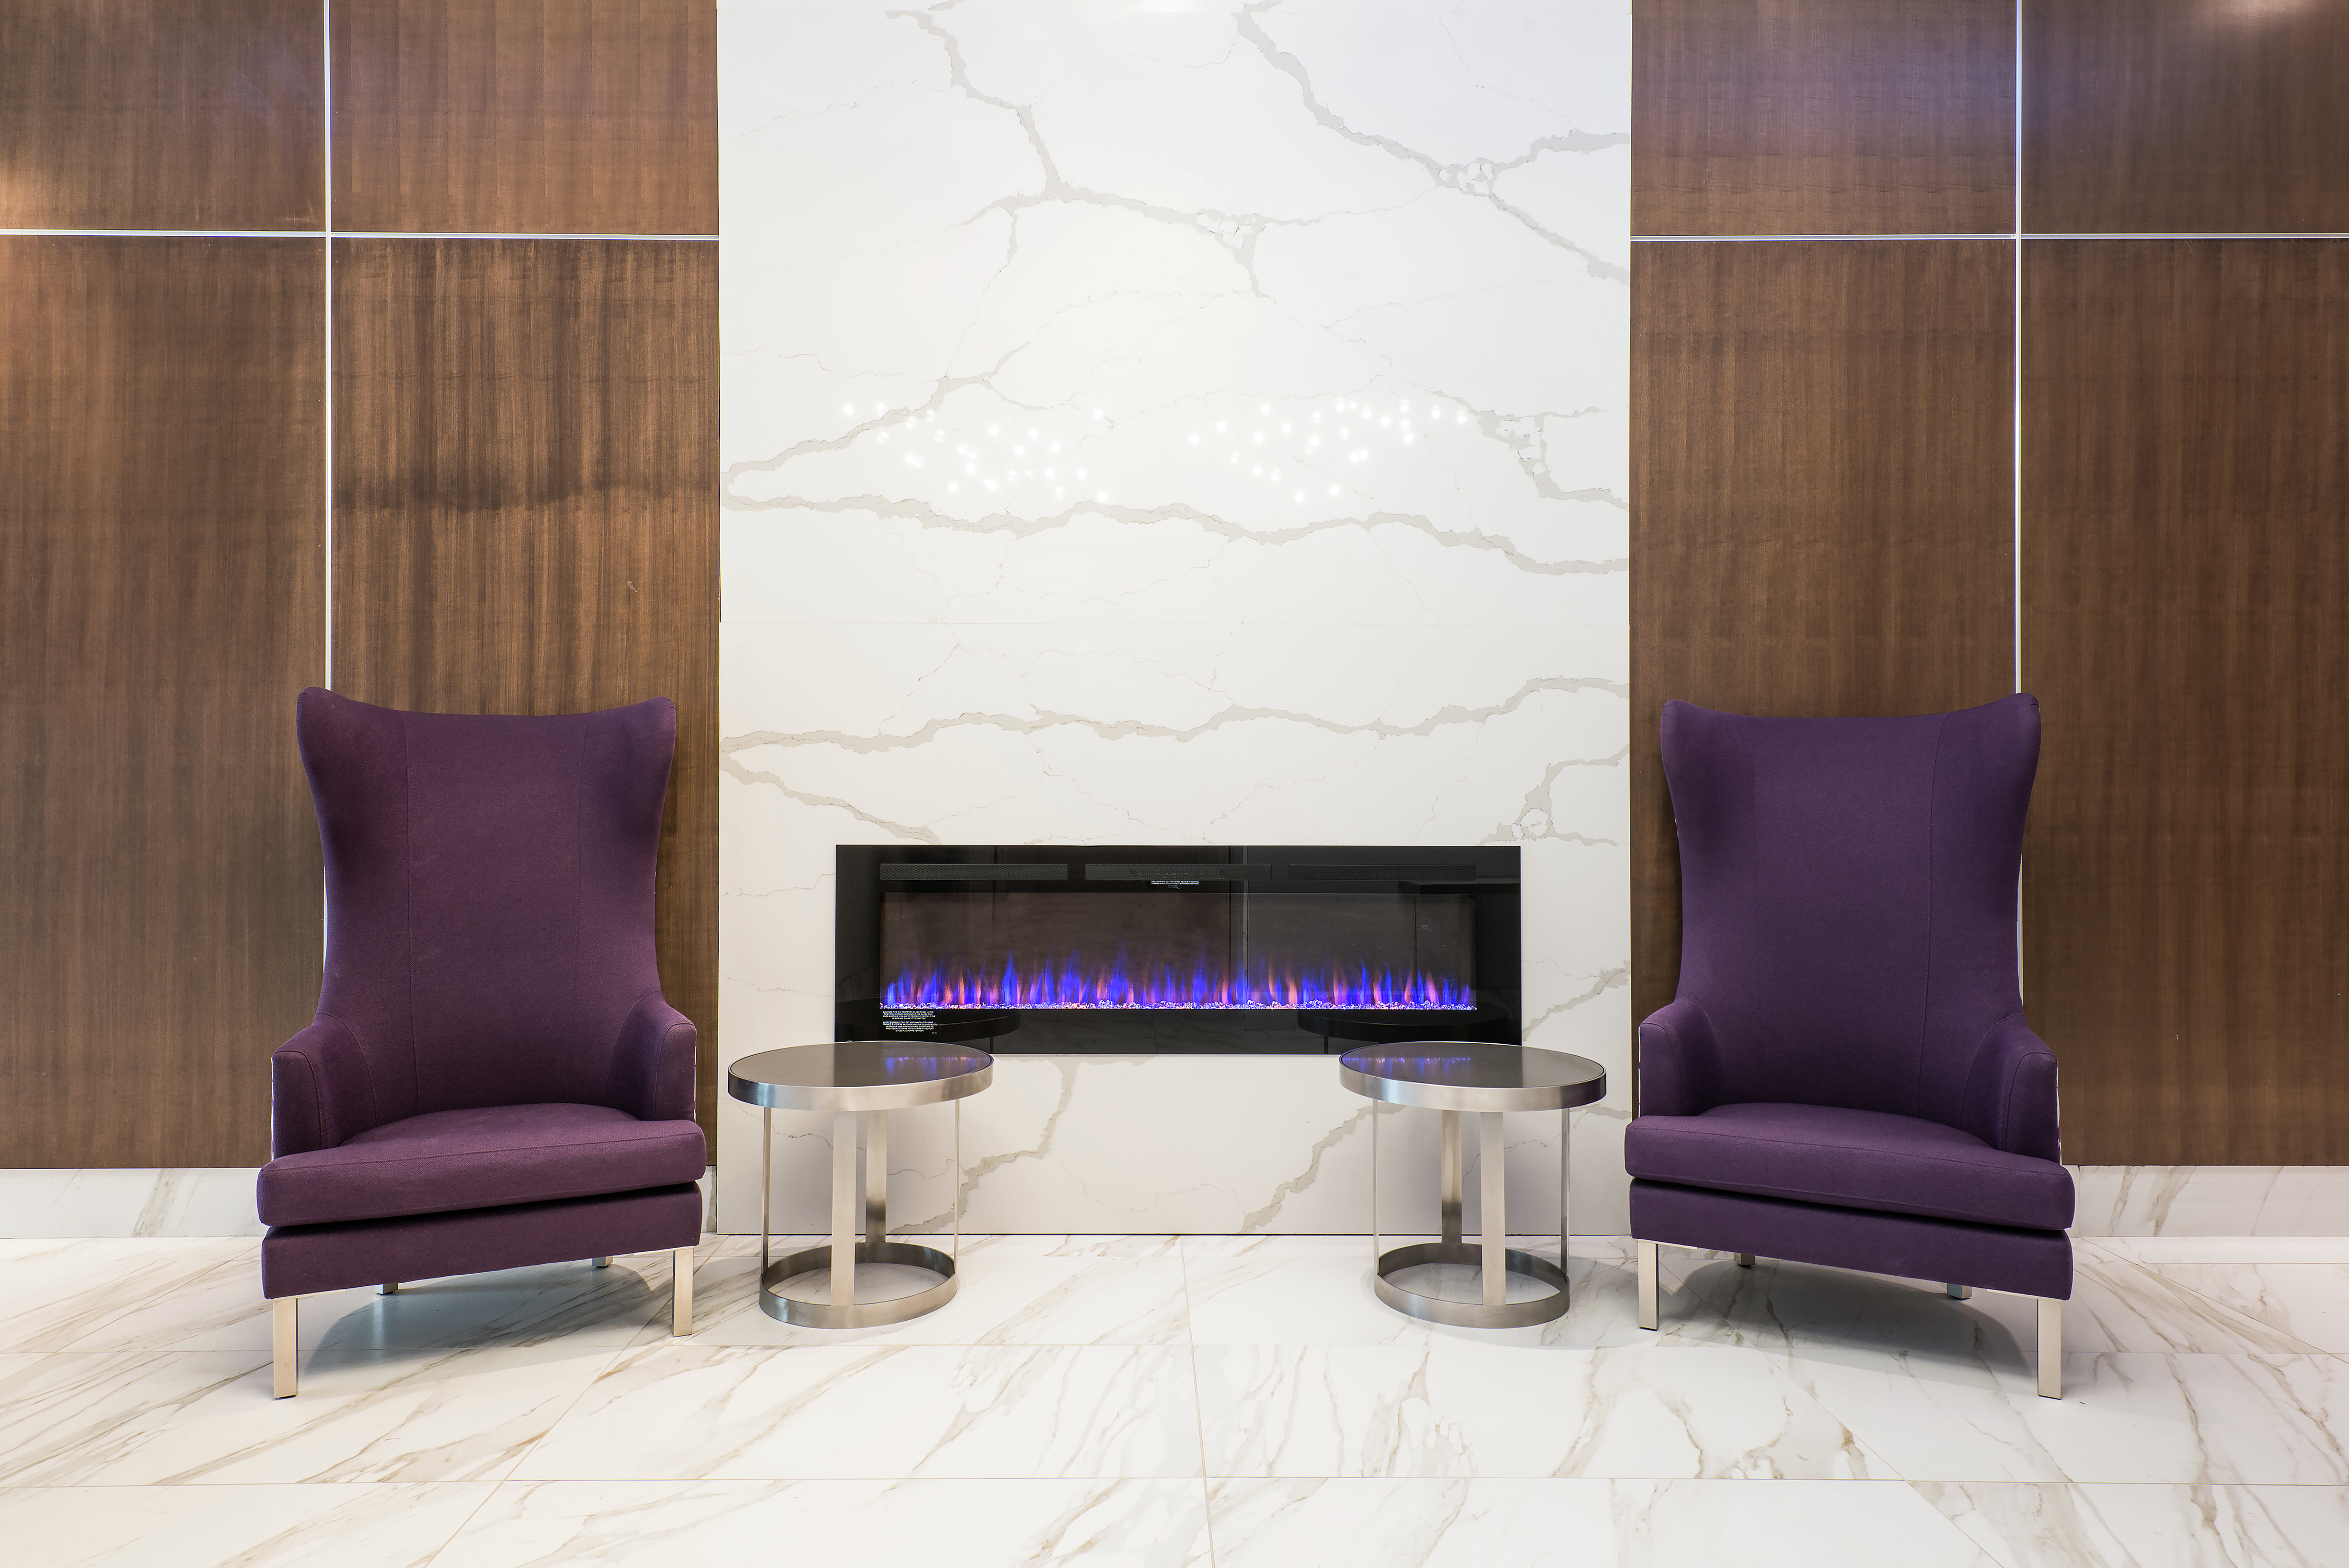 Lobby Fireplace Area with 2 Soft Chairs